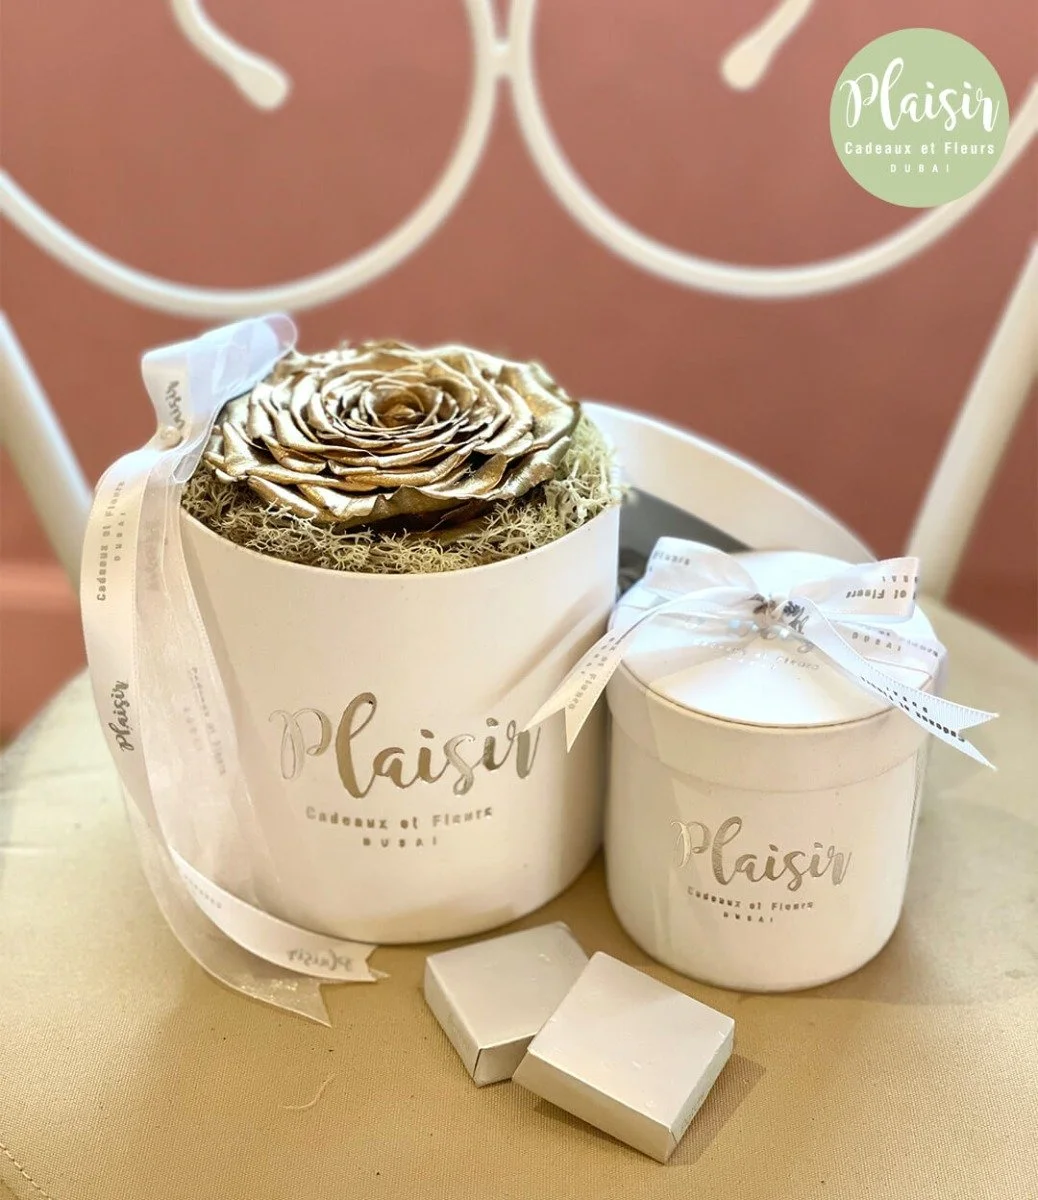 XL Gold Infinity Rose Cylinder and Patchi Chocolate Giftset in White by Plaisir